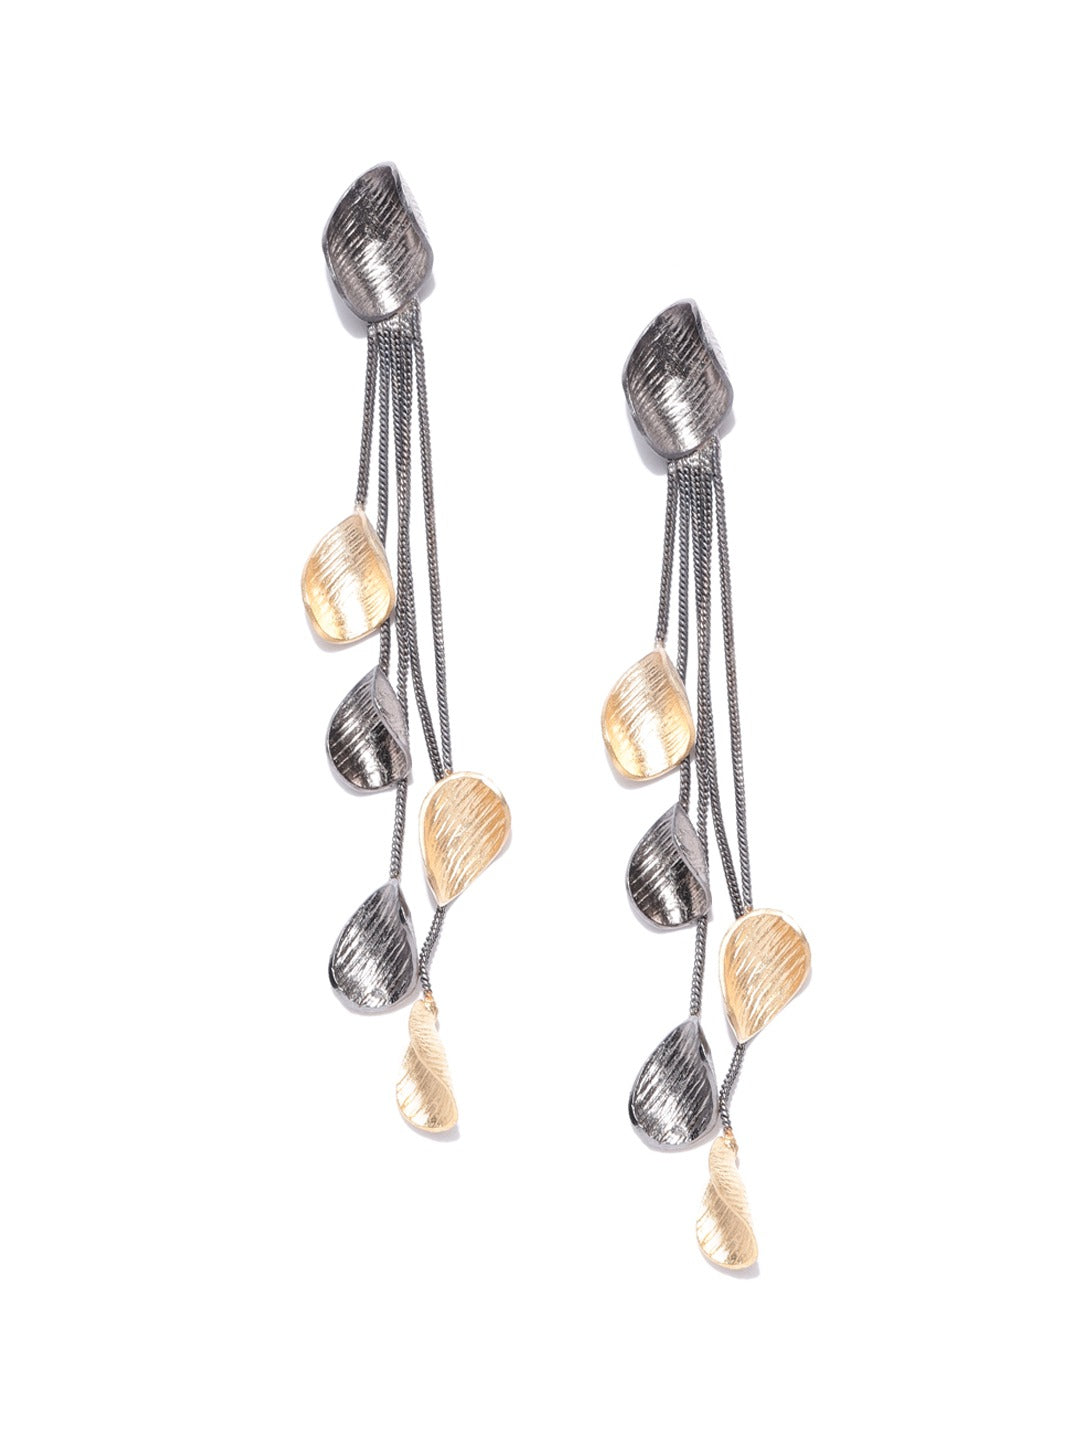 Dual-Toned Curved Shapes Tasselled Handcrafted Drop Earrings